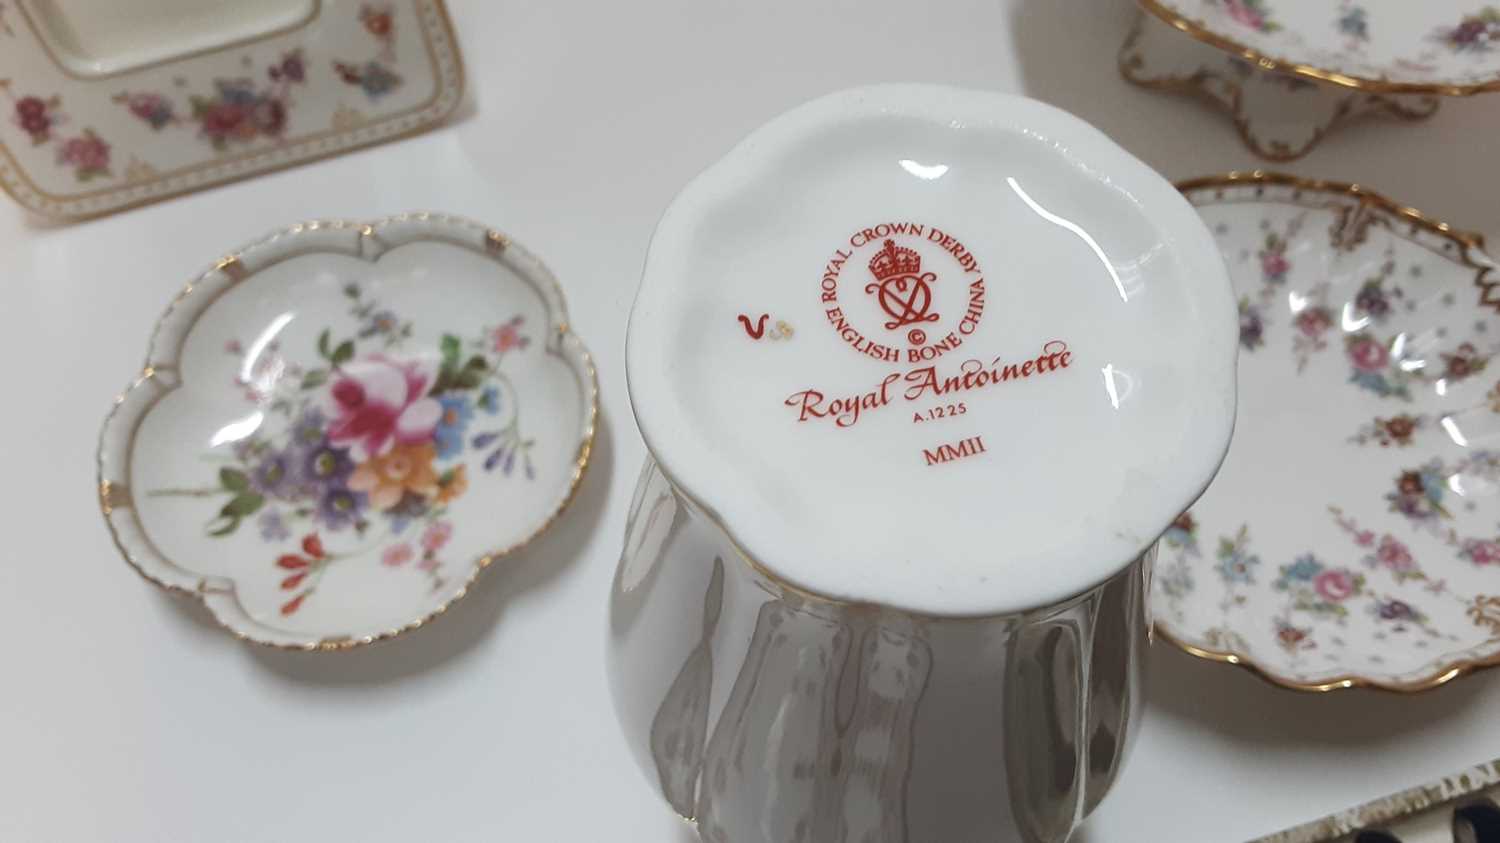 Royal Crown Derby Antoinette pattern china - Image 2 of 2